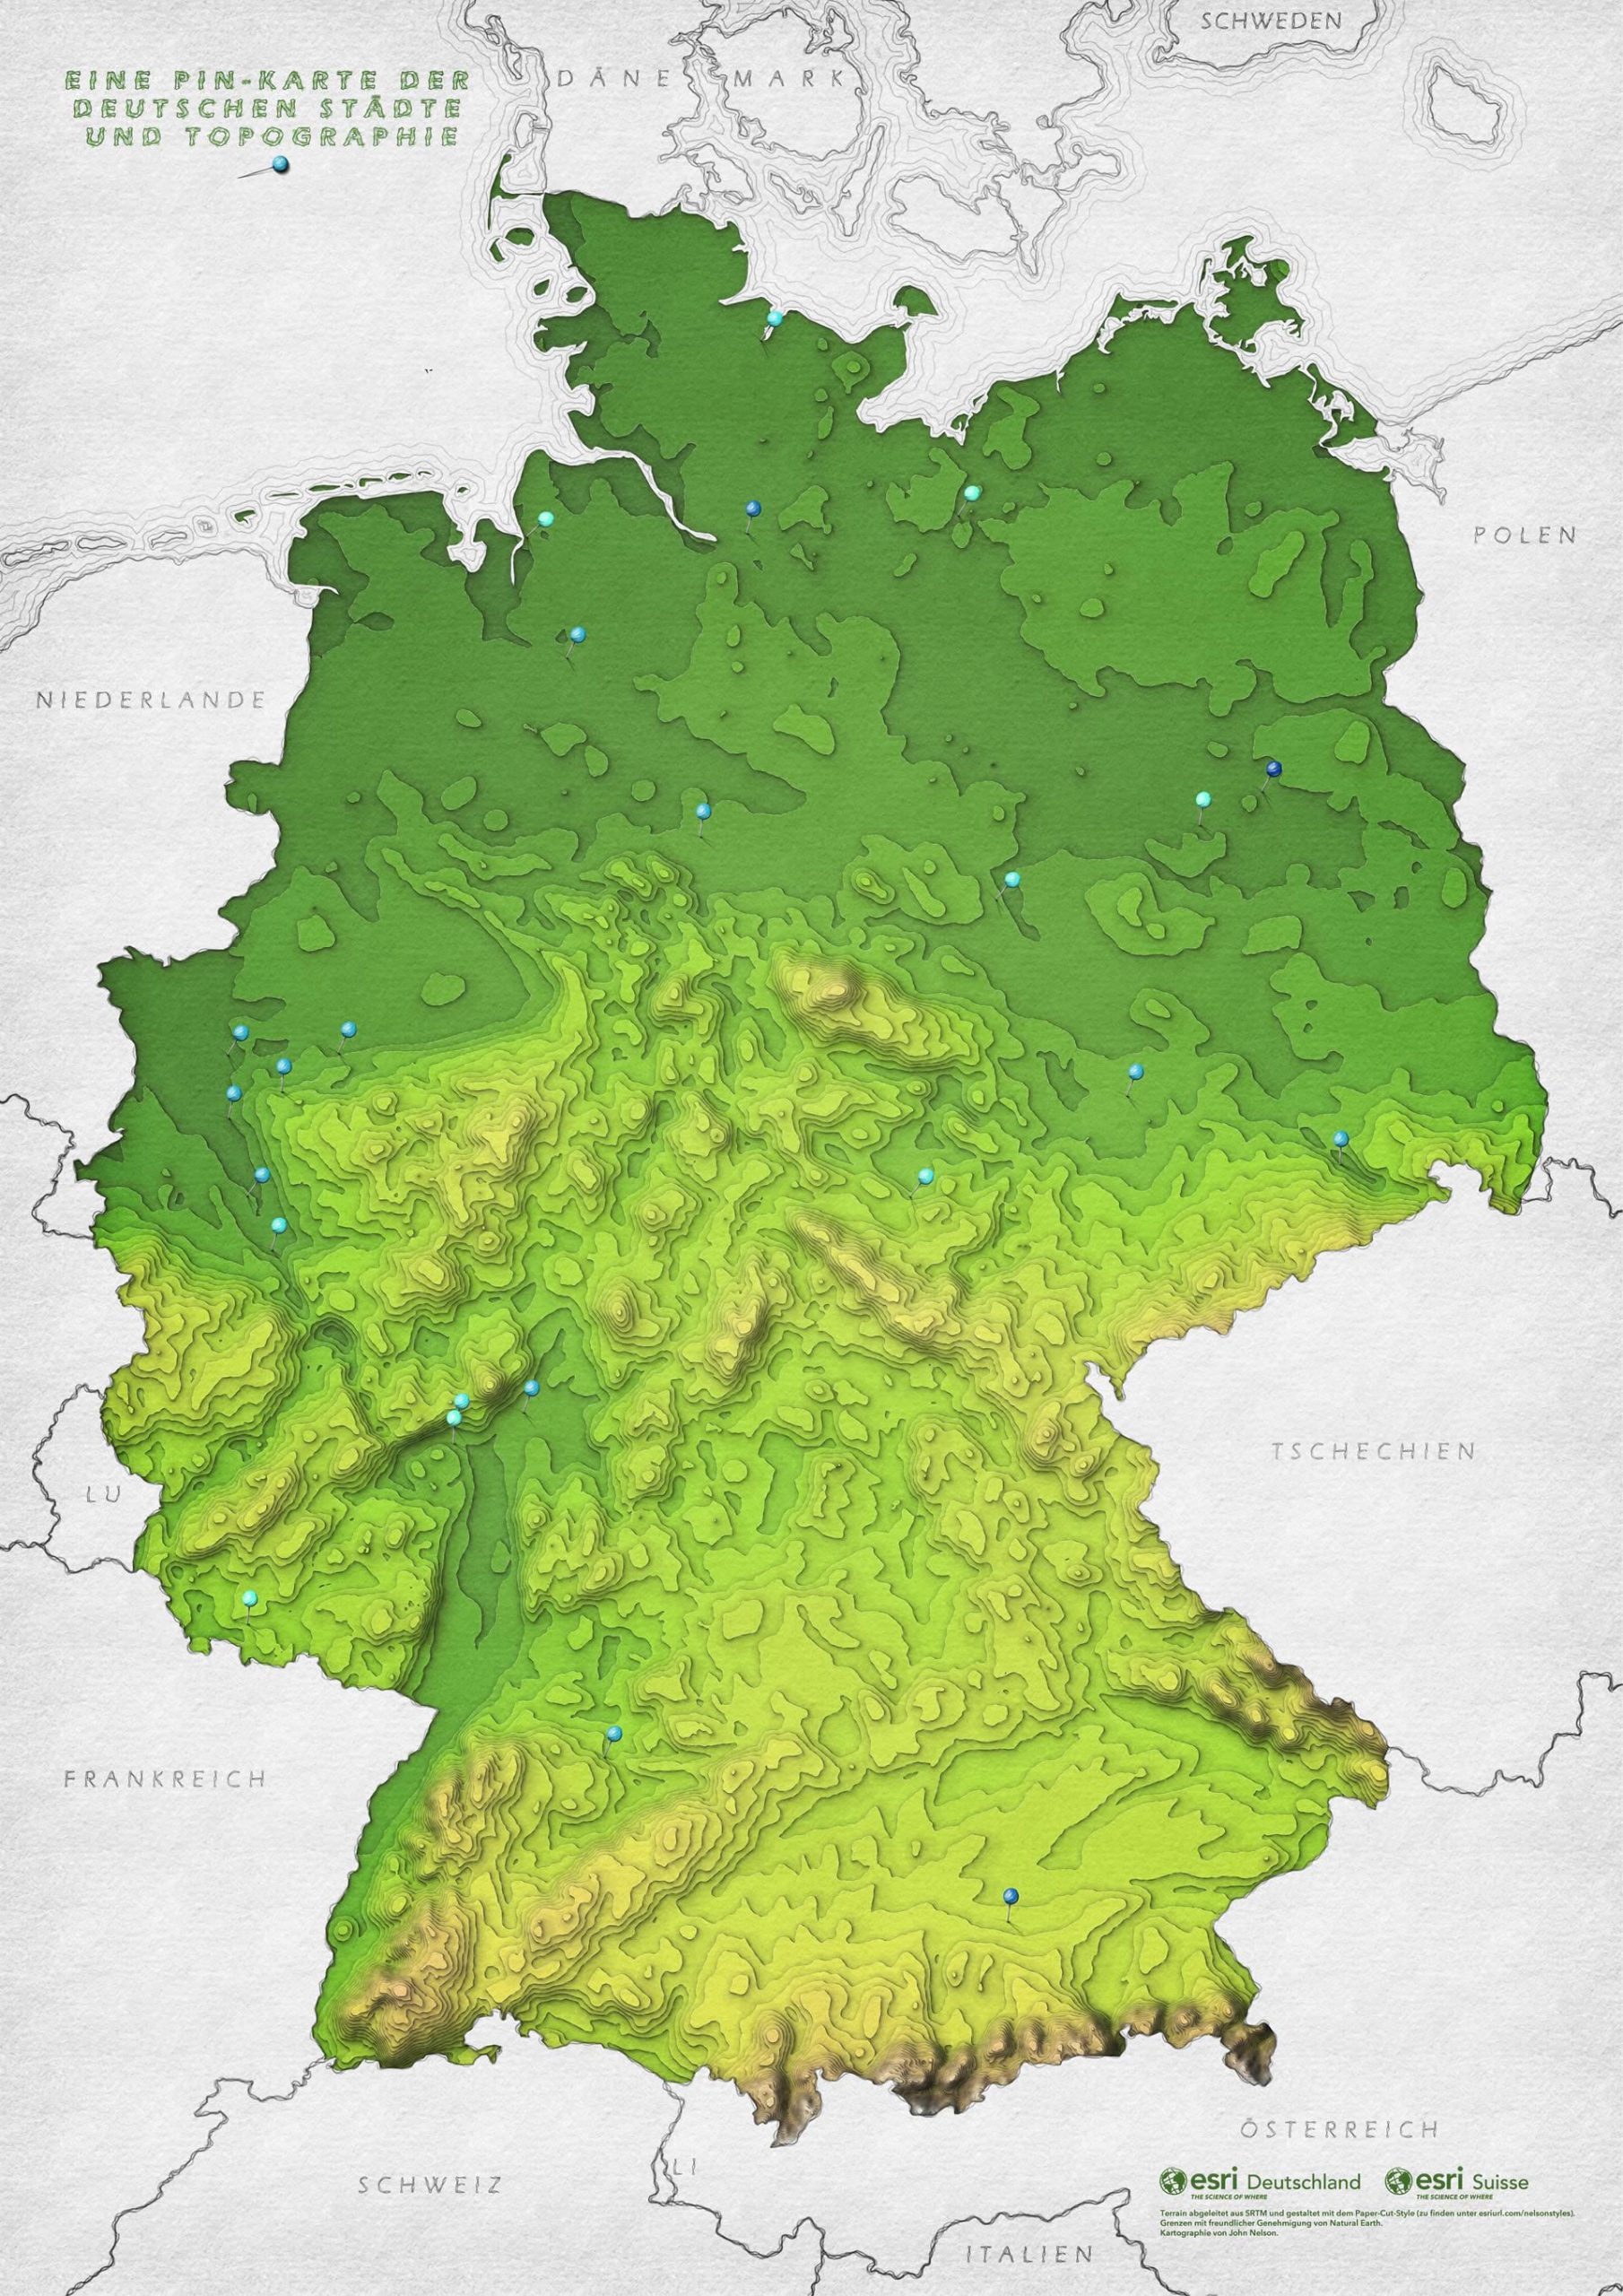 How To Make This Paper Terrain Map Of Germany